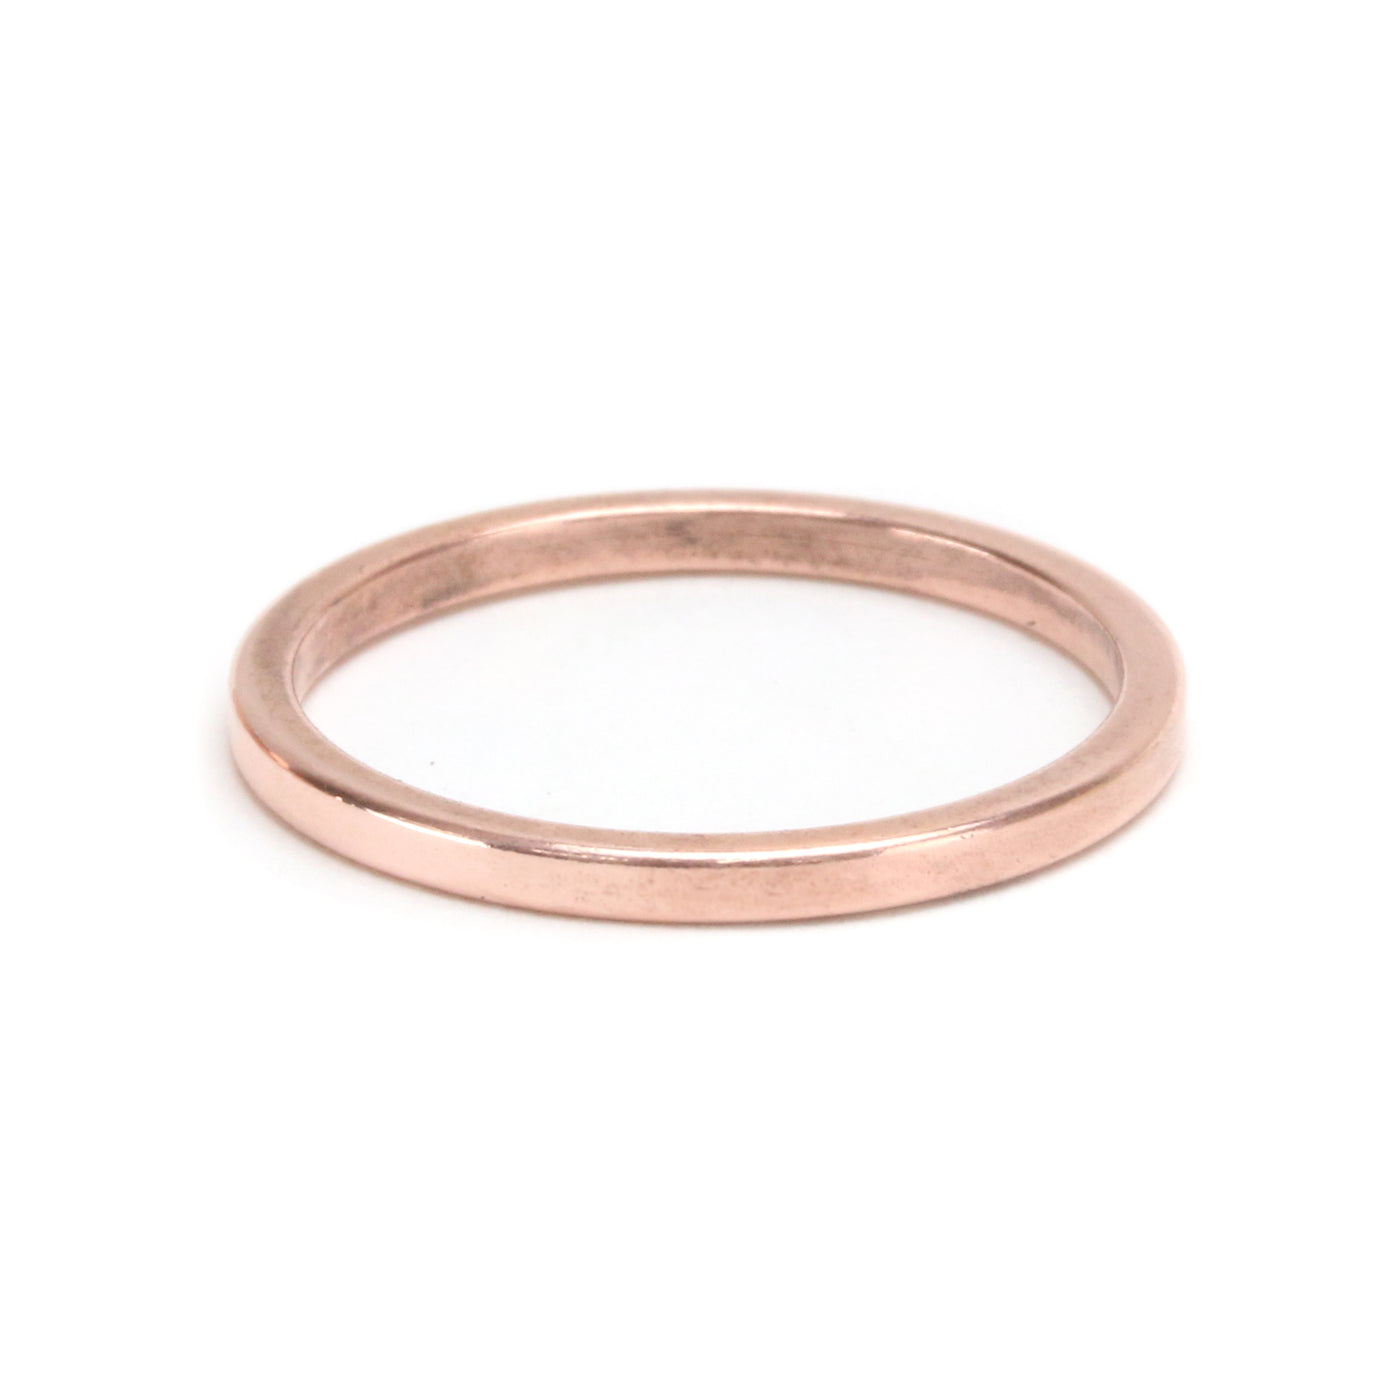 Buy 14k Yellow Gold 7.75mm Lattice Band Ring, Size 6 at Amazon.in